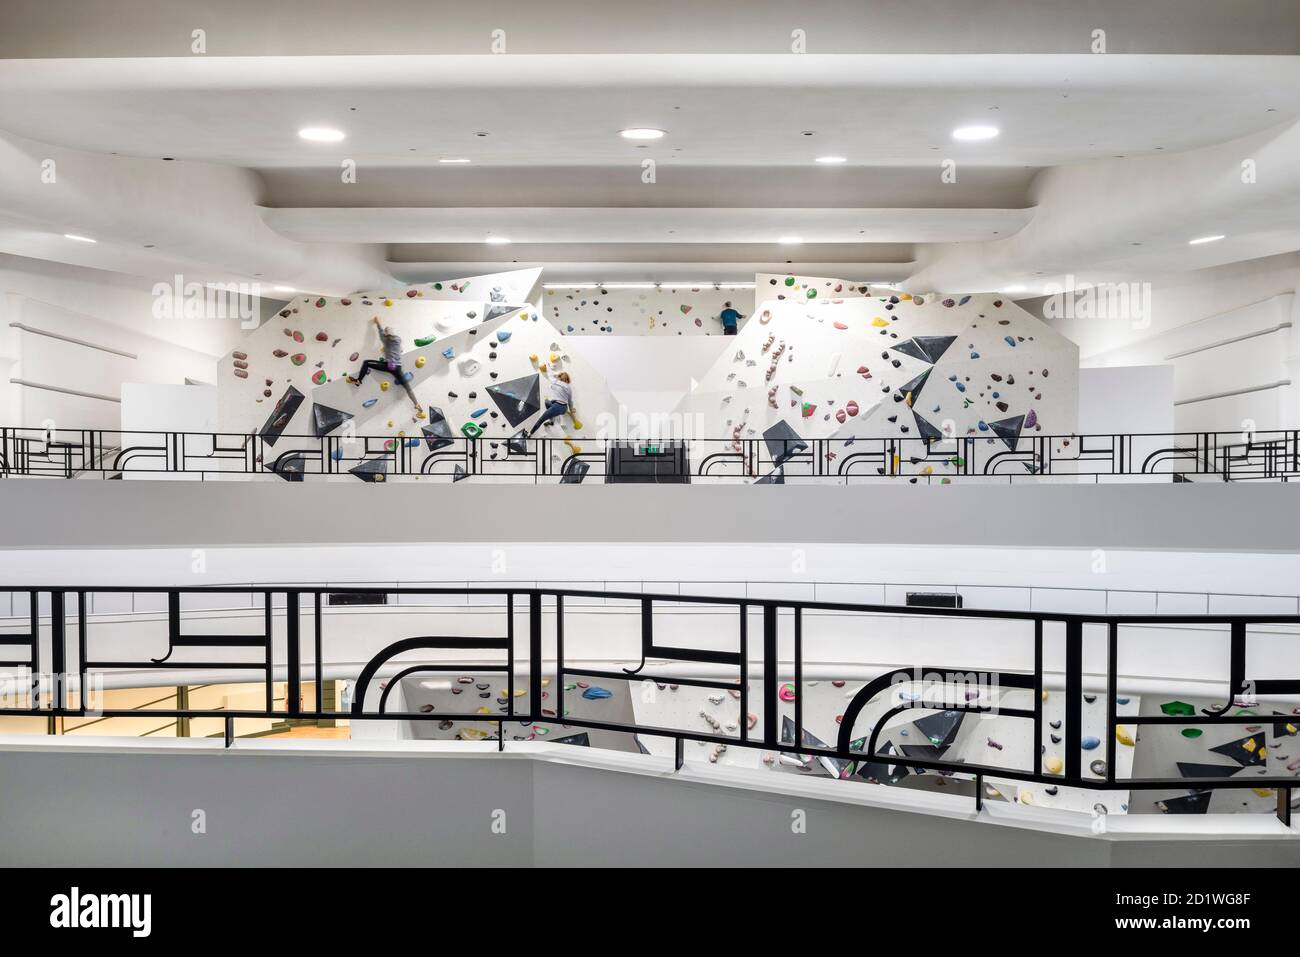 Interior view of the Arch Climbing Wall centre, a former Art Deco style cinema built in the 1930s, originally called Dominion, Acton, London, completed in December 2018. Stock Photo